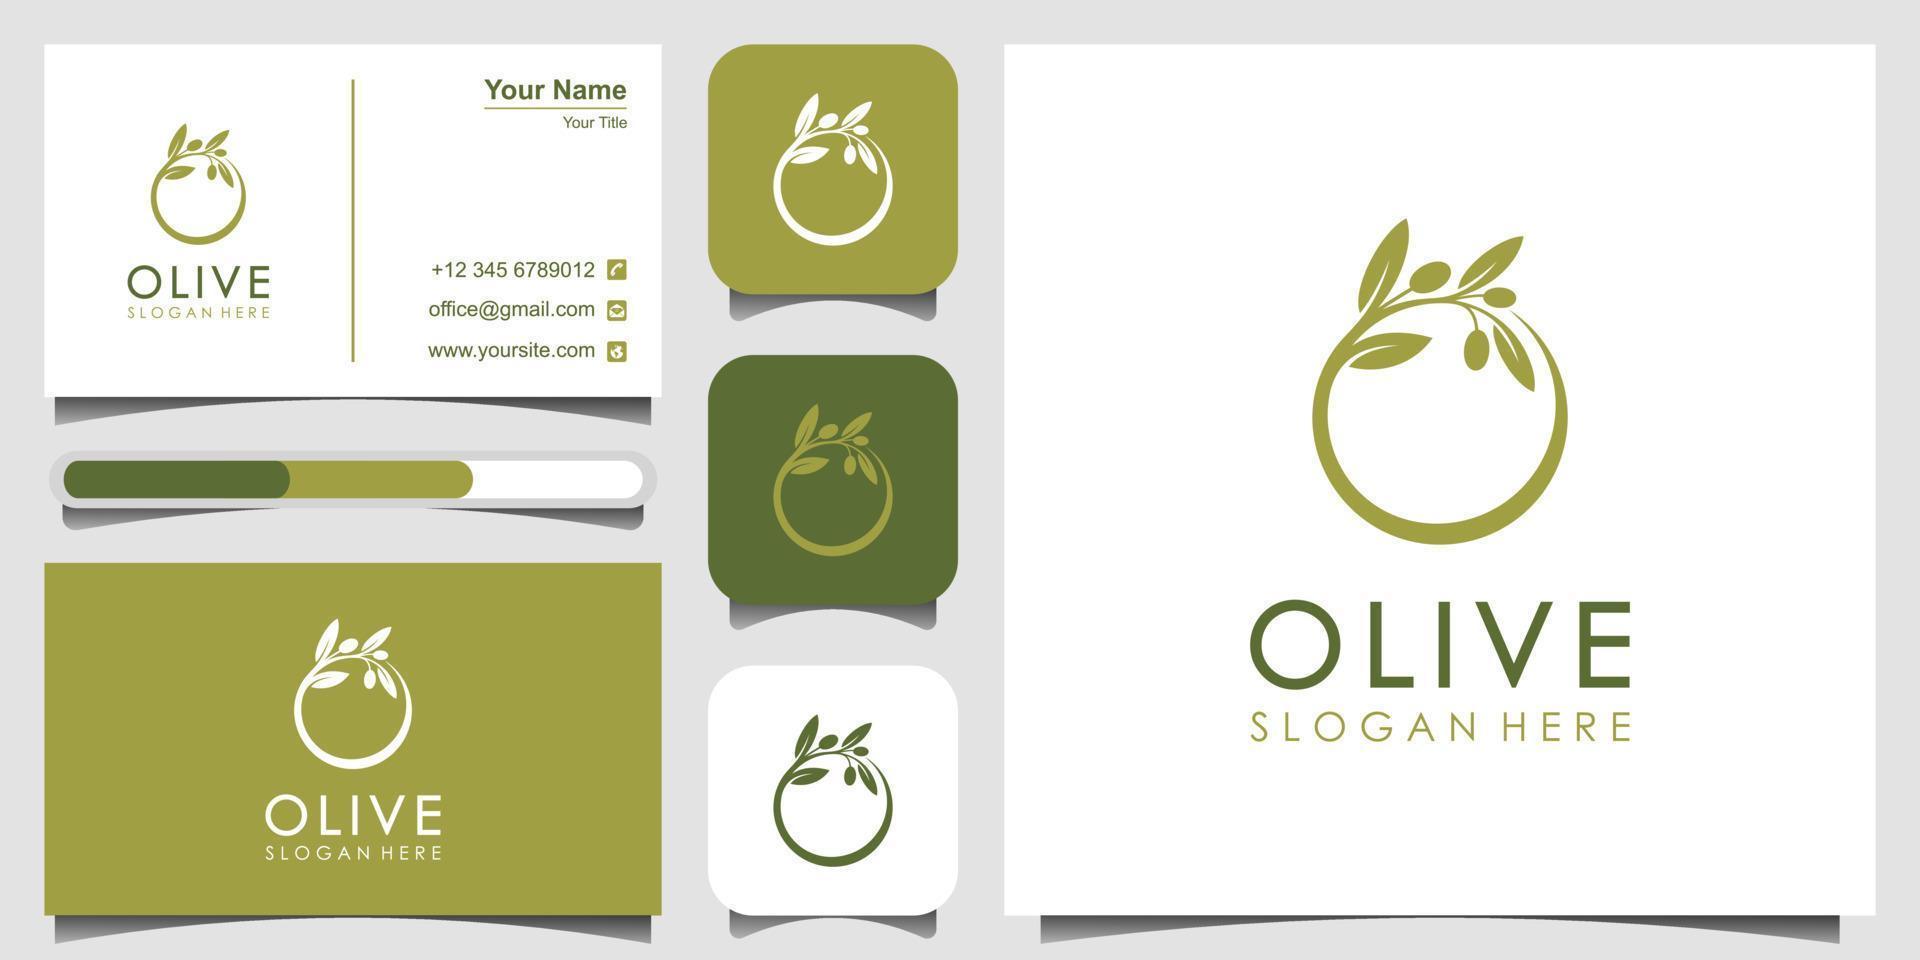 Olive oil logo template vector icon and business cards